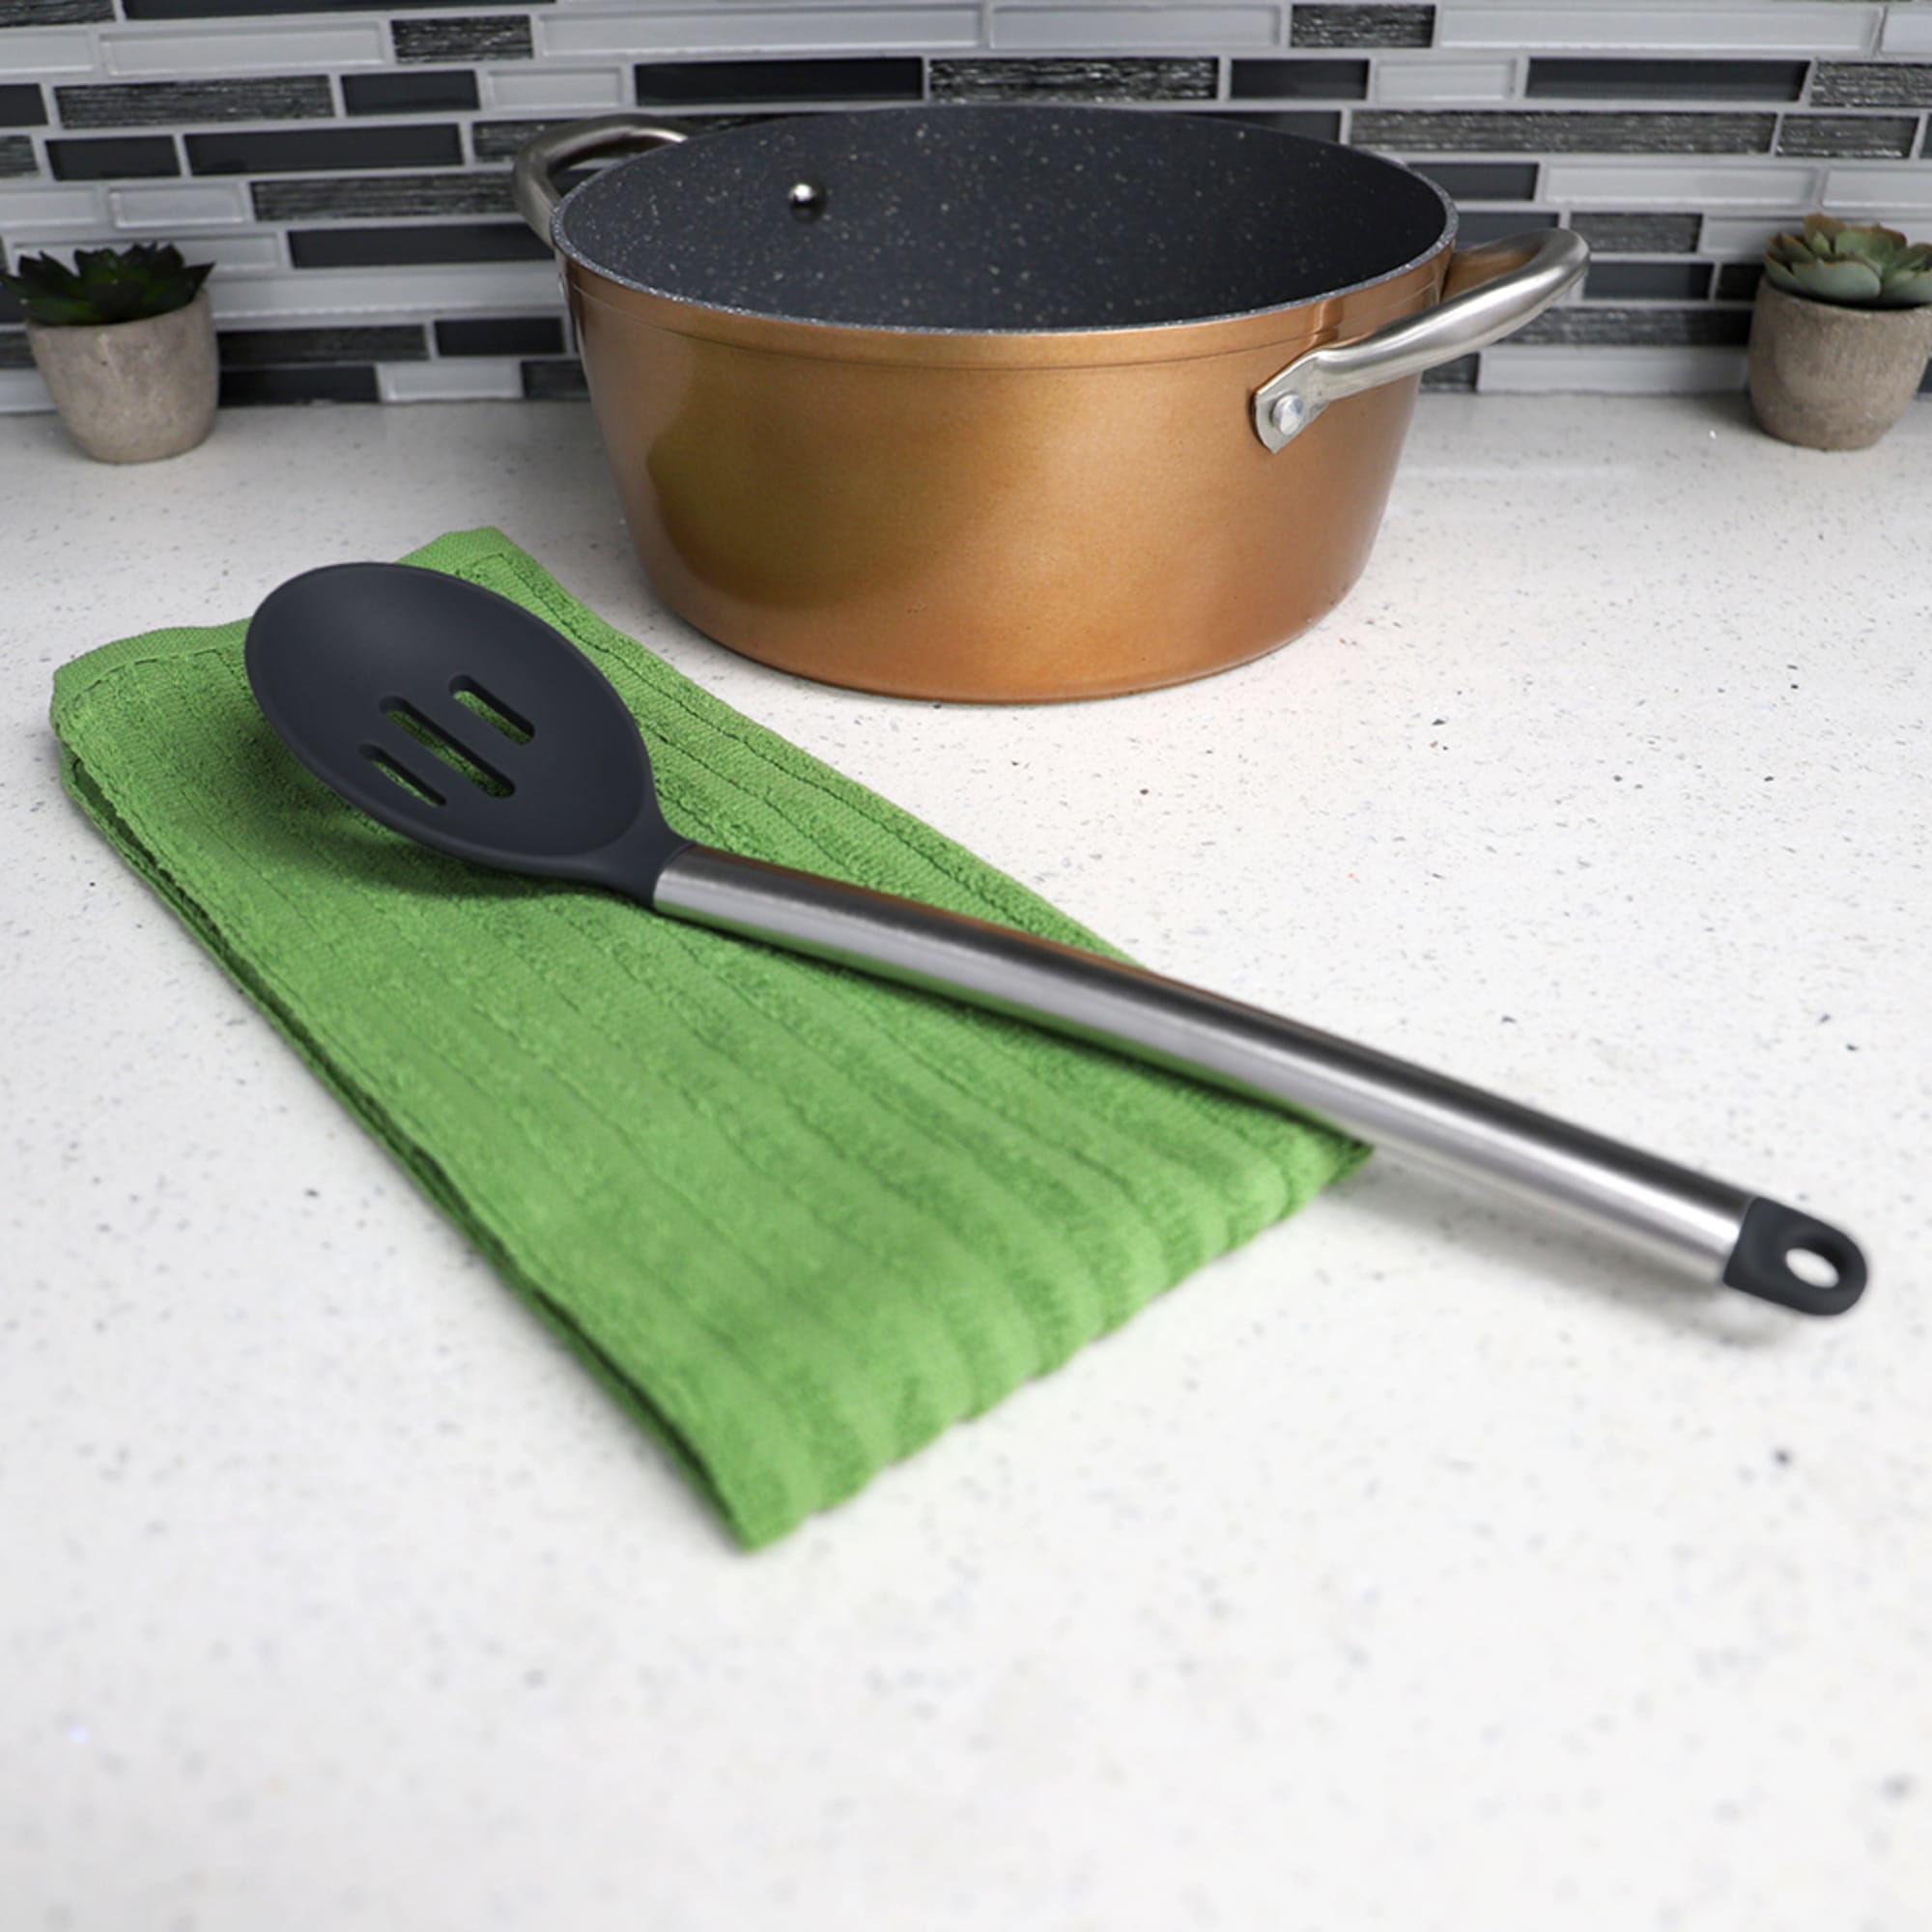 Home Basics Stainless Steel Slotted Spoon With Nylon Head, Black $2.00 EACH, CASE PACK OF 24